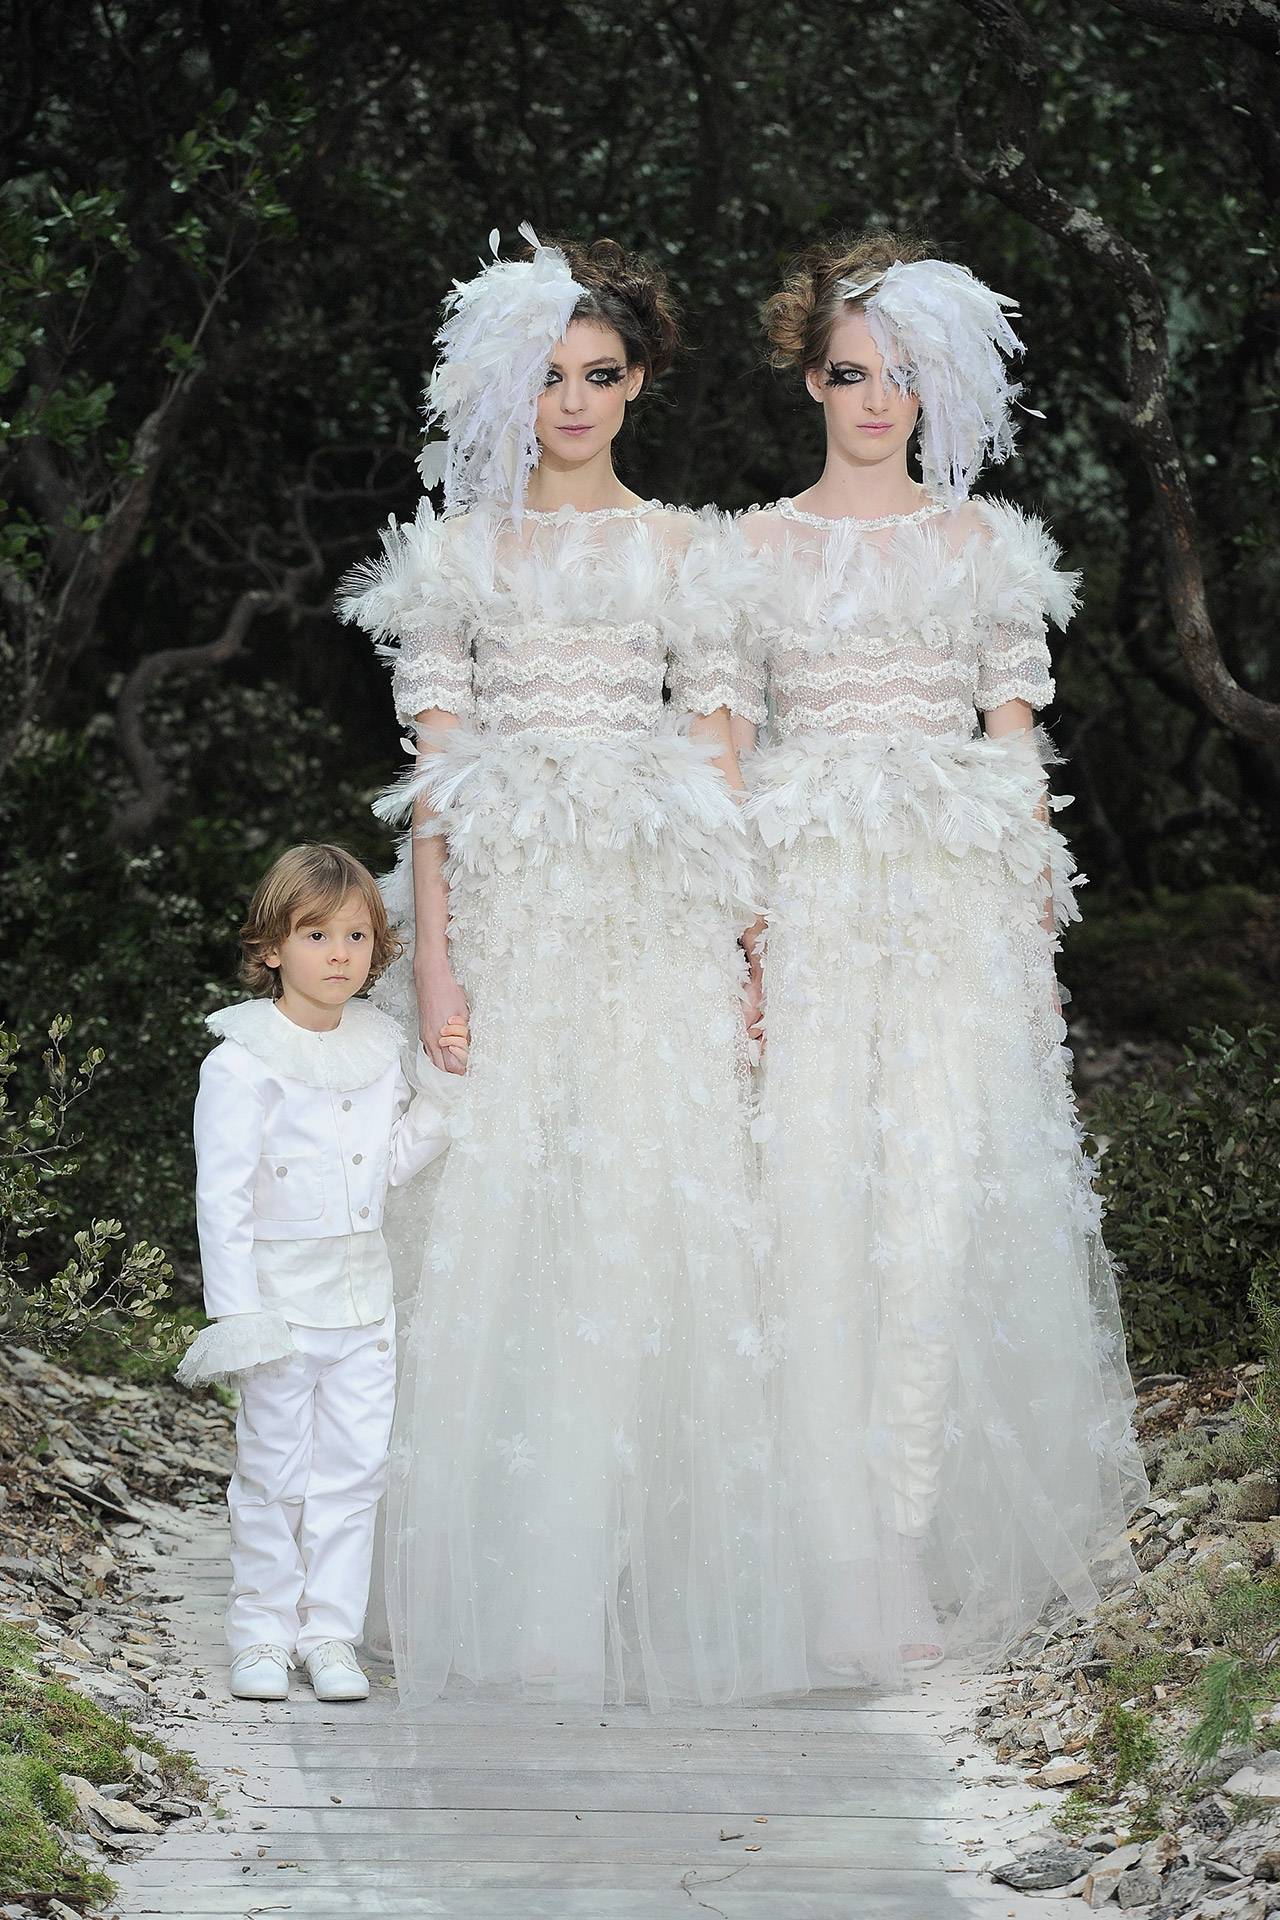 Chanel haute couture wiosna/lato 2013.
(©Fot. Kristy Sparow/Getty Images)